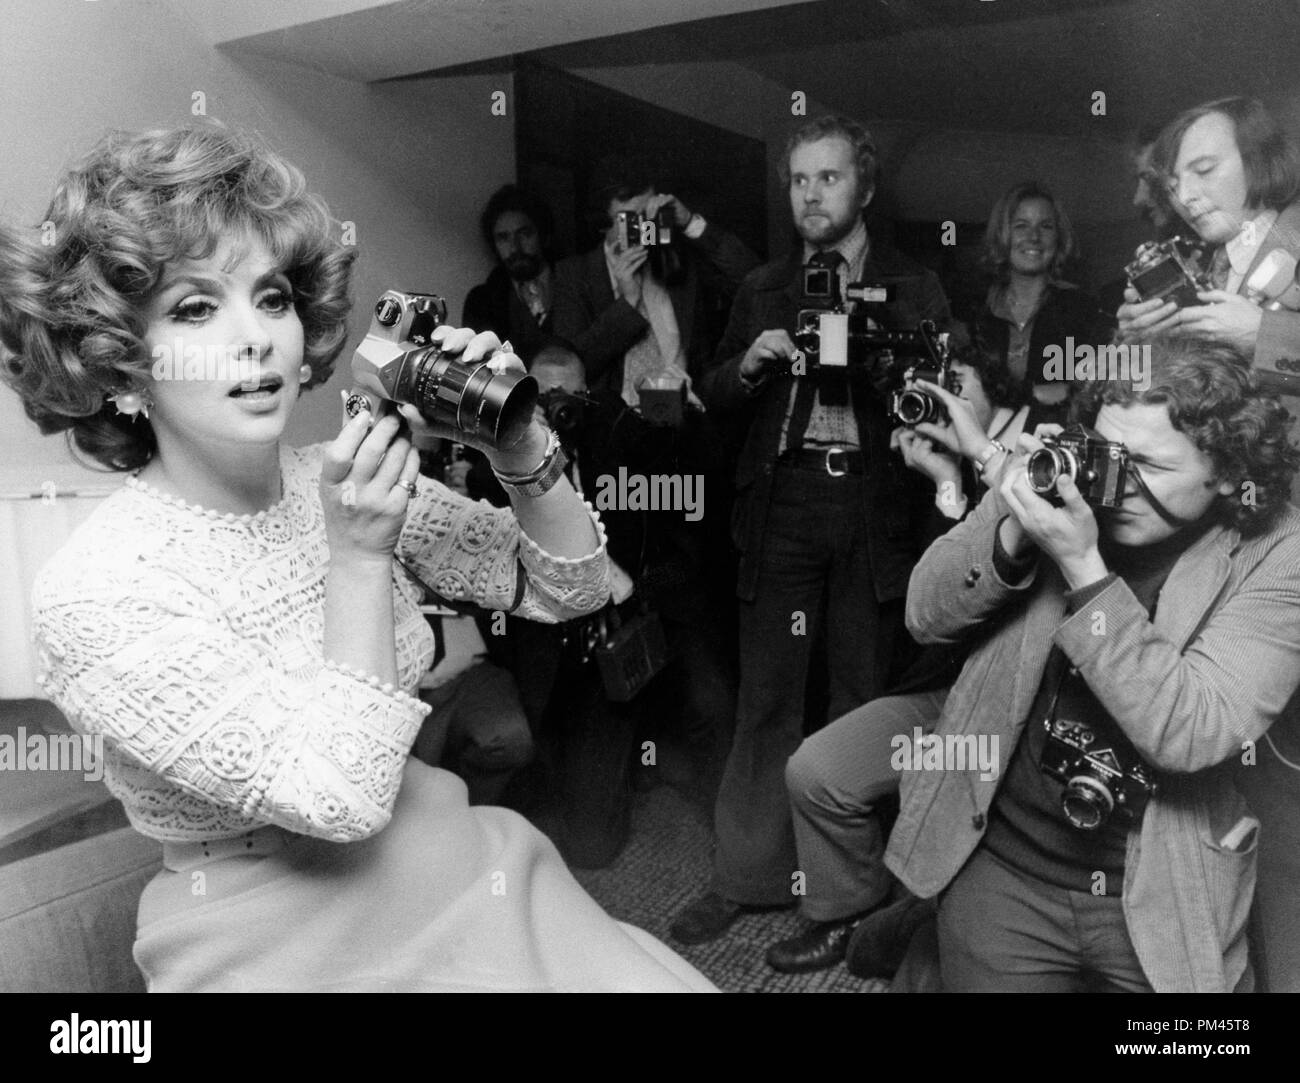 Gina Lollobrigida promoting her photography book 'Italia Mia'1973. File Reference #1041 012THA © JRC /The Hollywood Archive - All Rights Reserved. Stock Photo